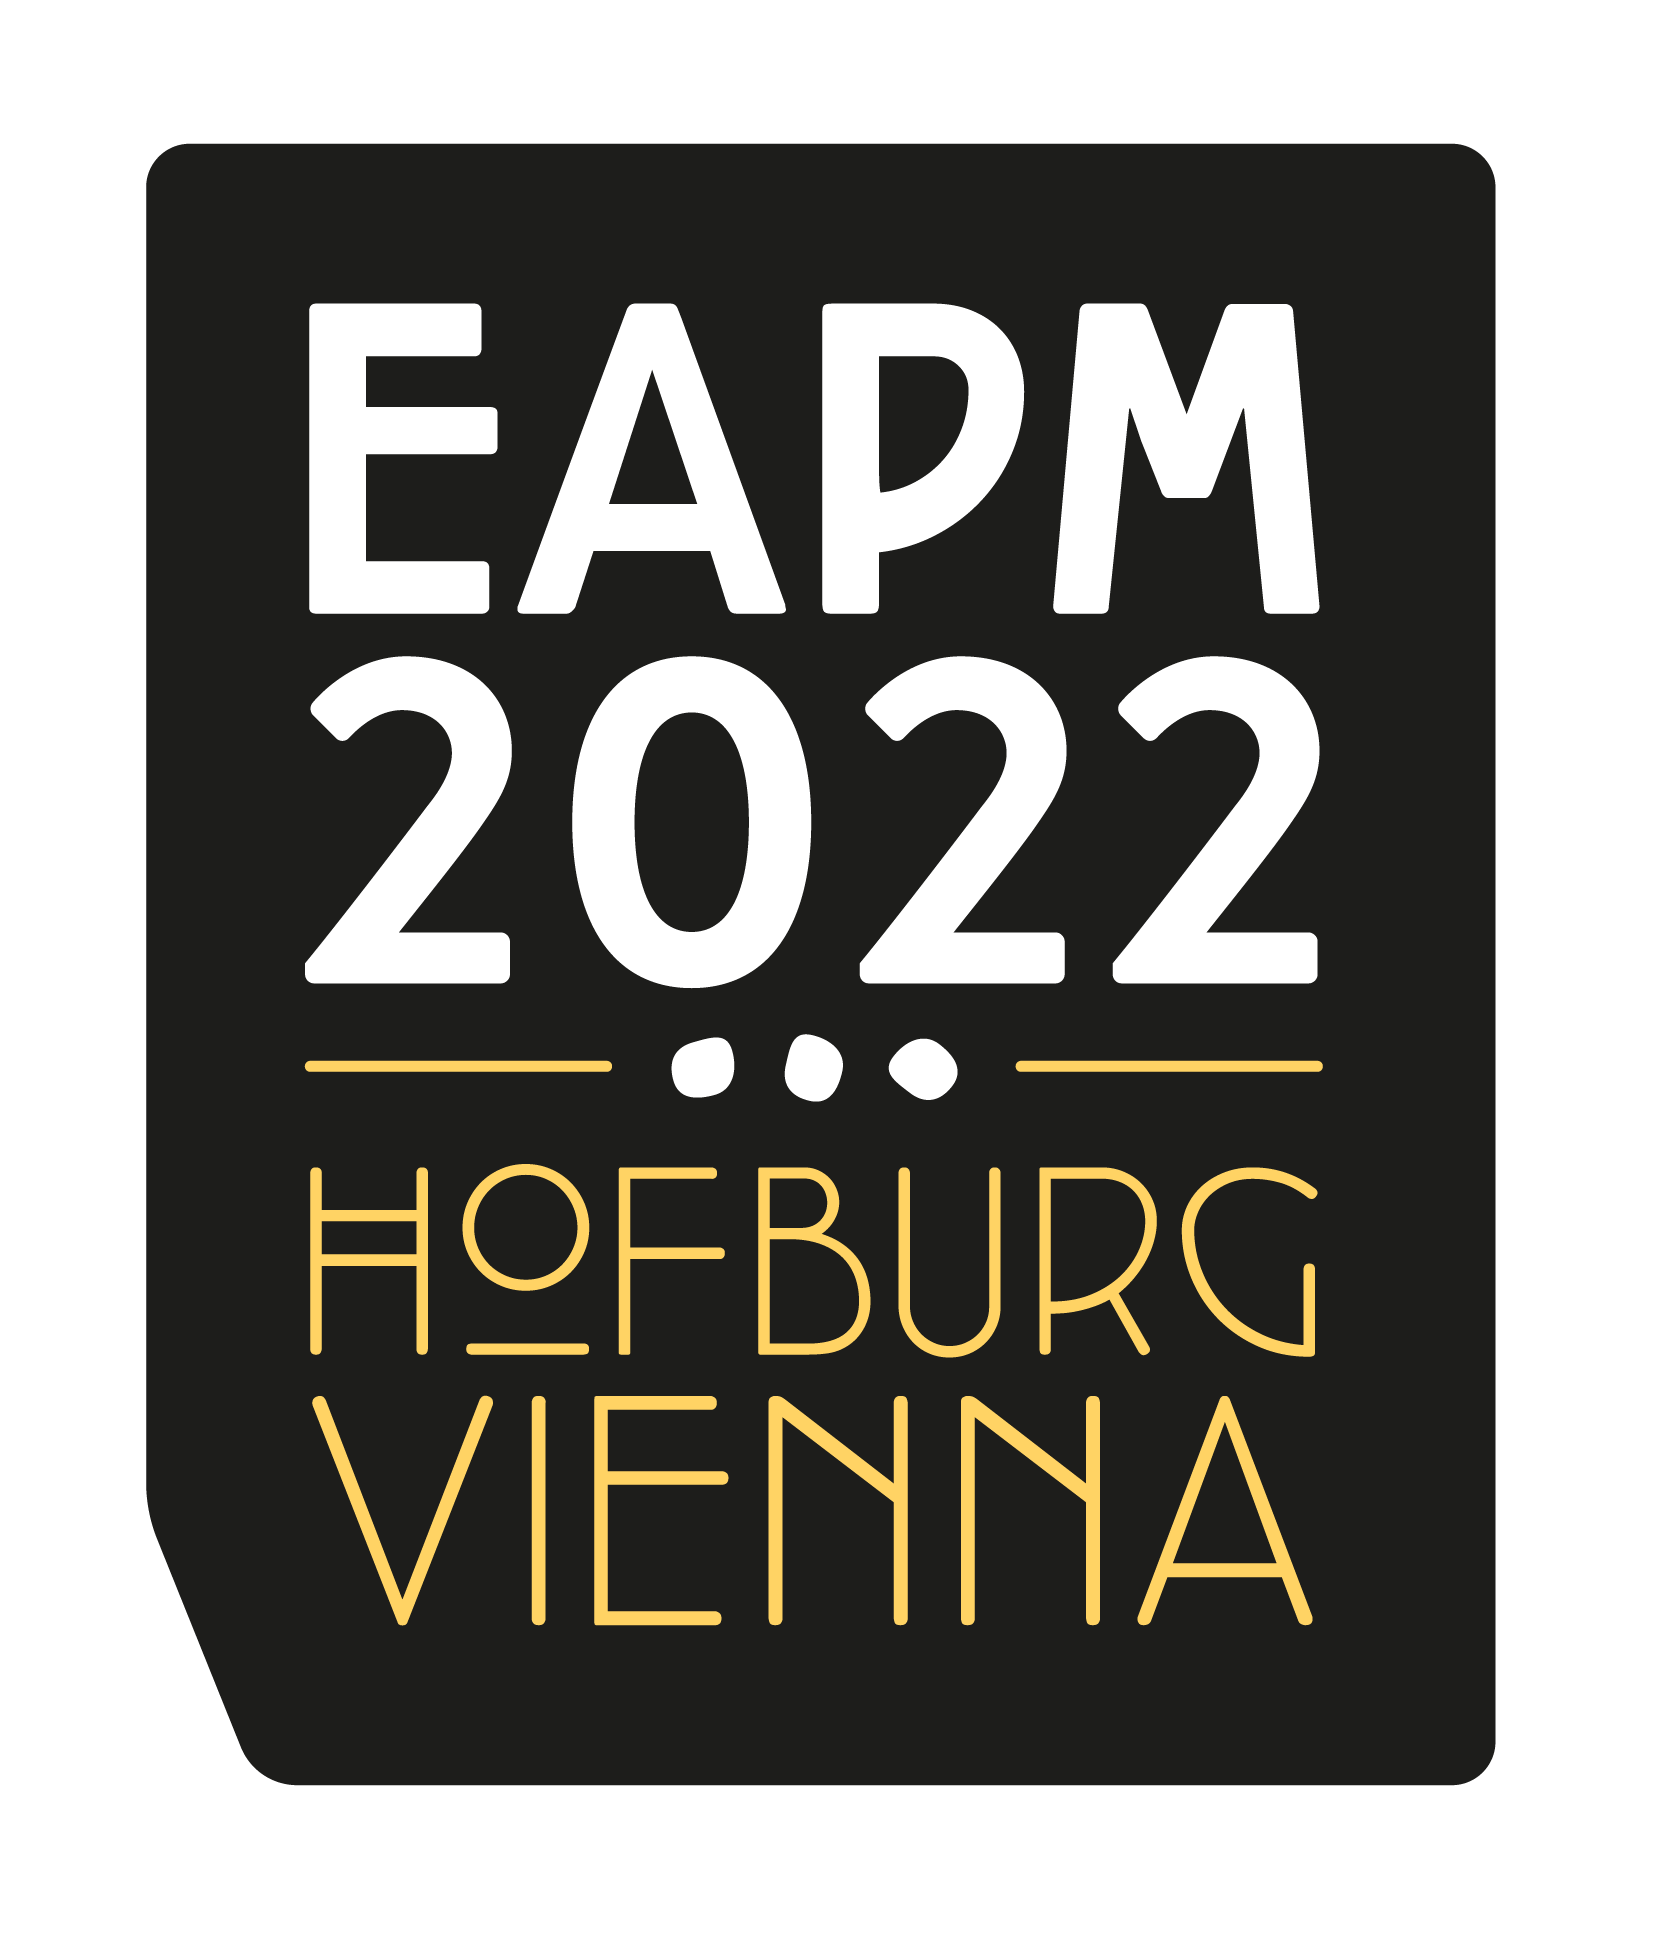 EAPM2020